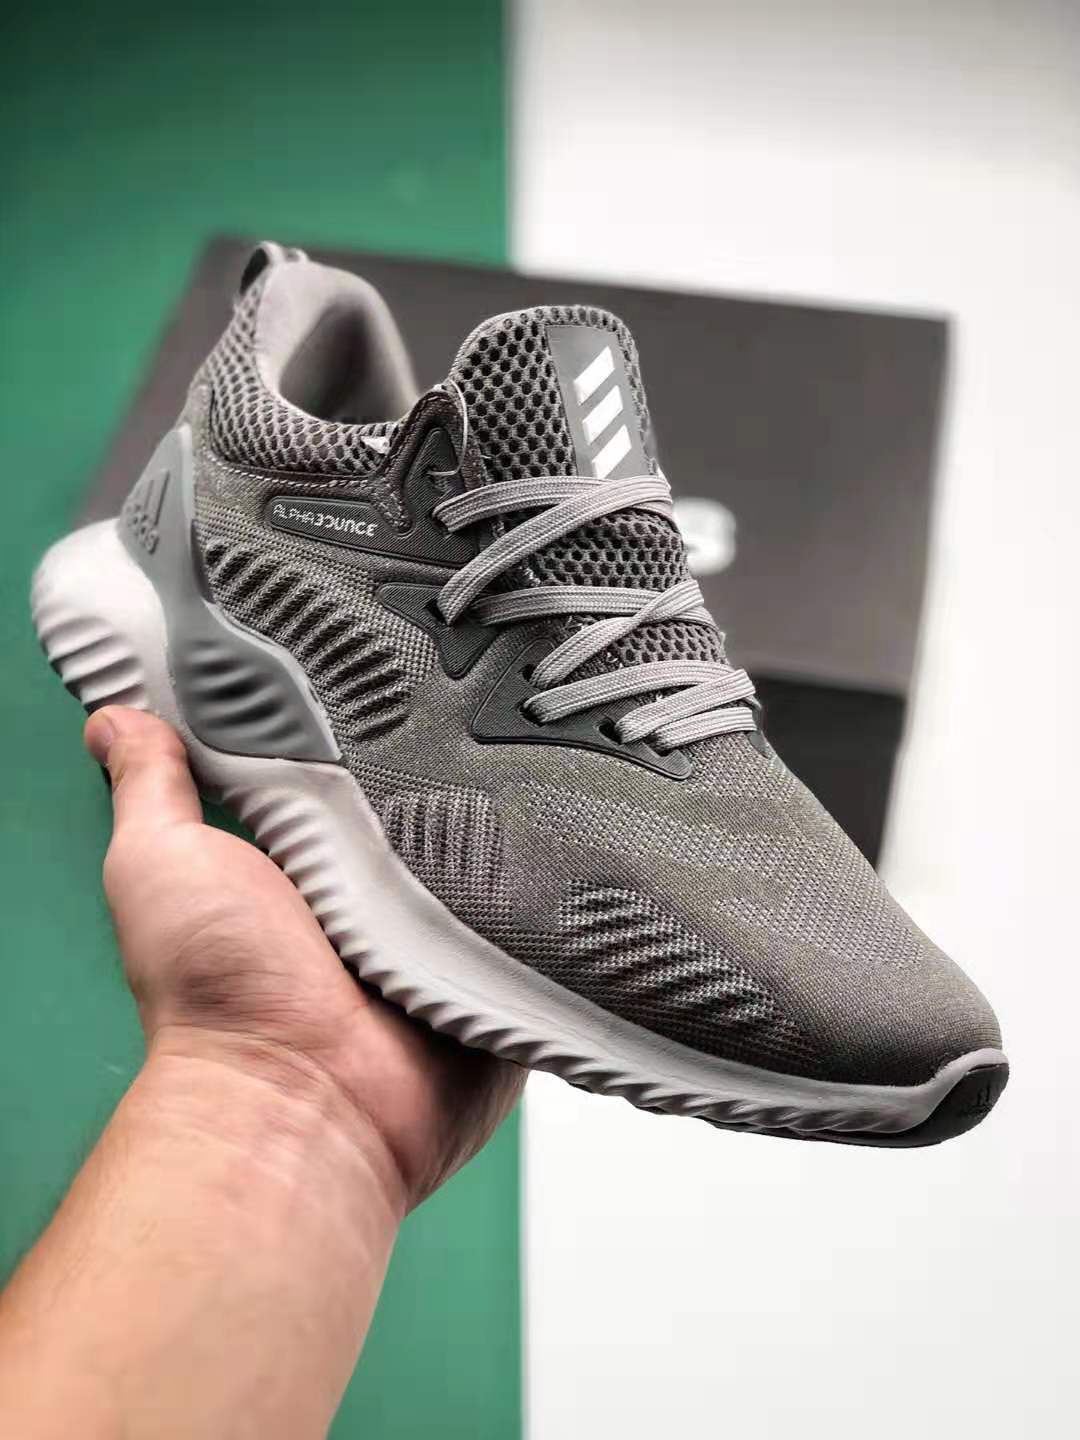 Adidas Alphabounce Beyond M Grey CG4765 - Best Price, Free Shipping!